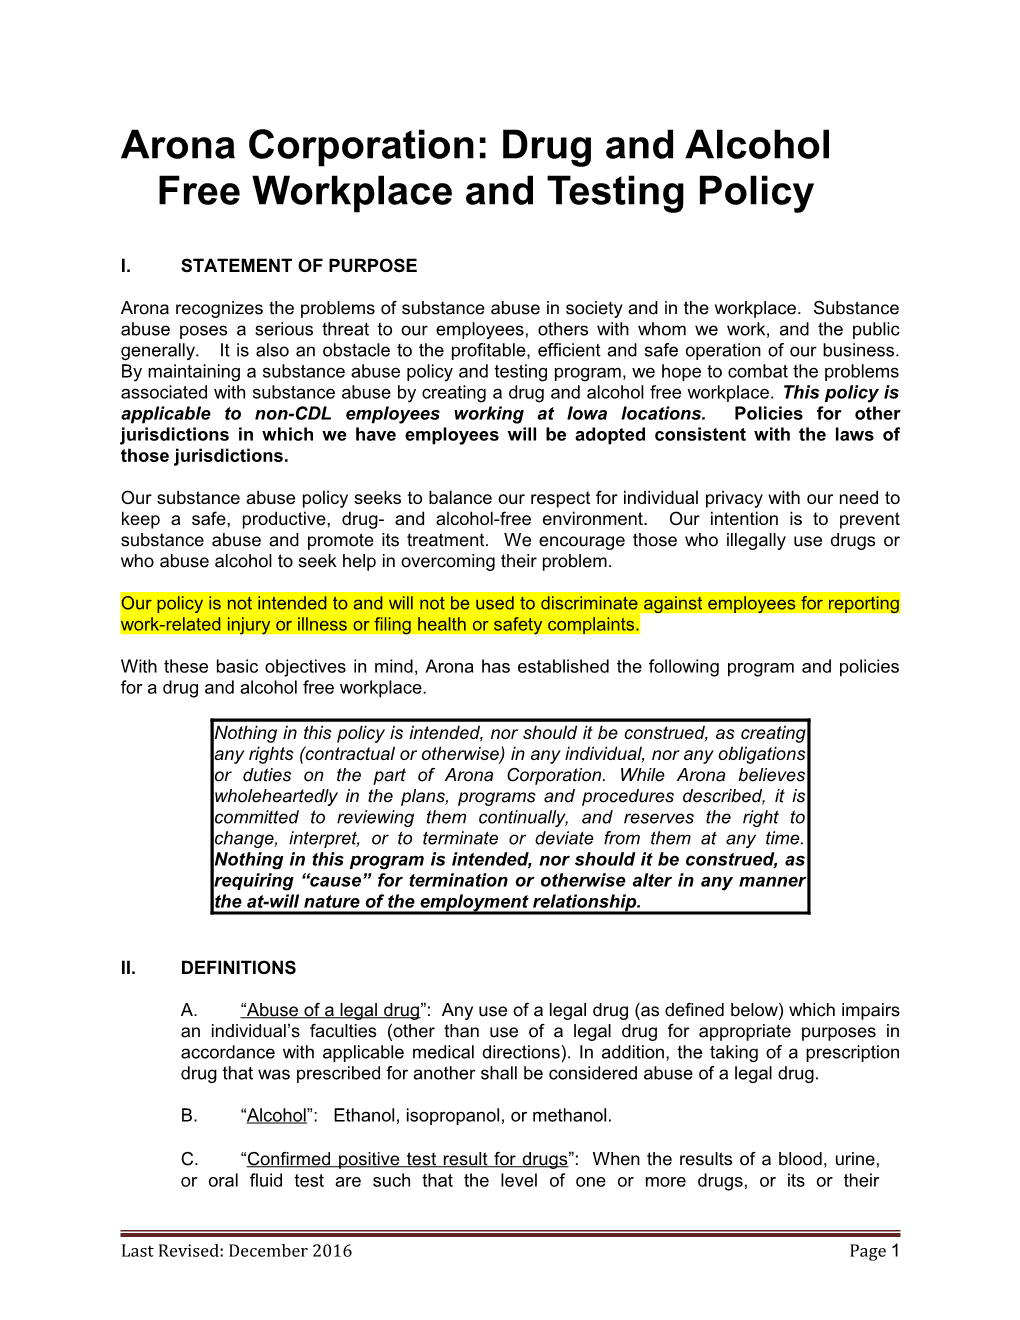 Arona Corporation: Drug and Alcohol Free Workplace and Testing Policy